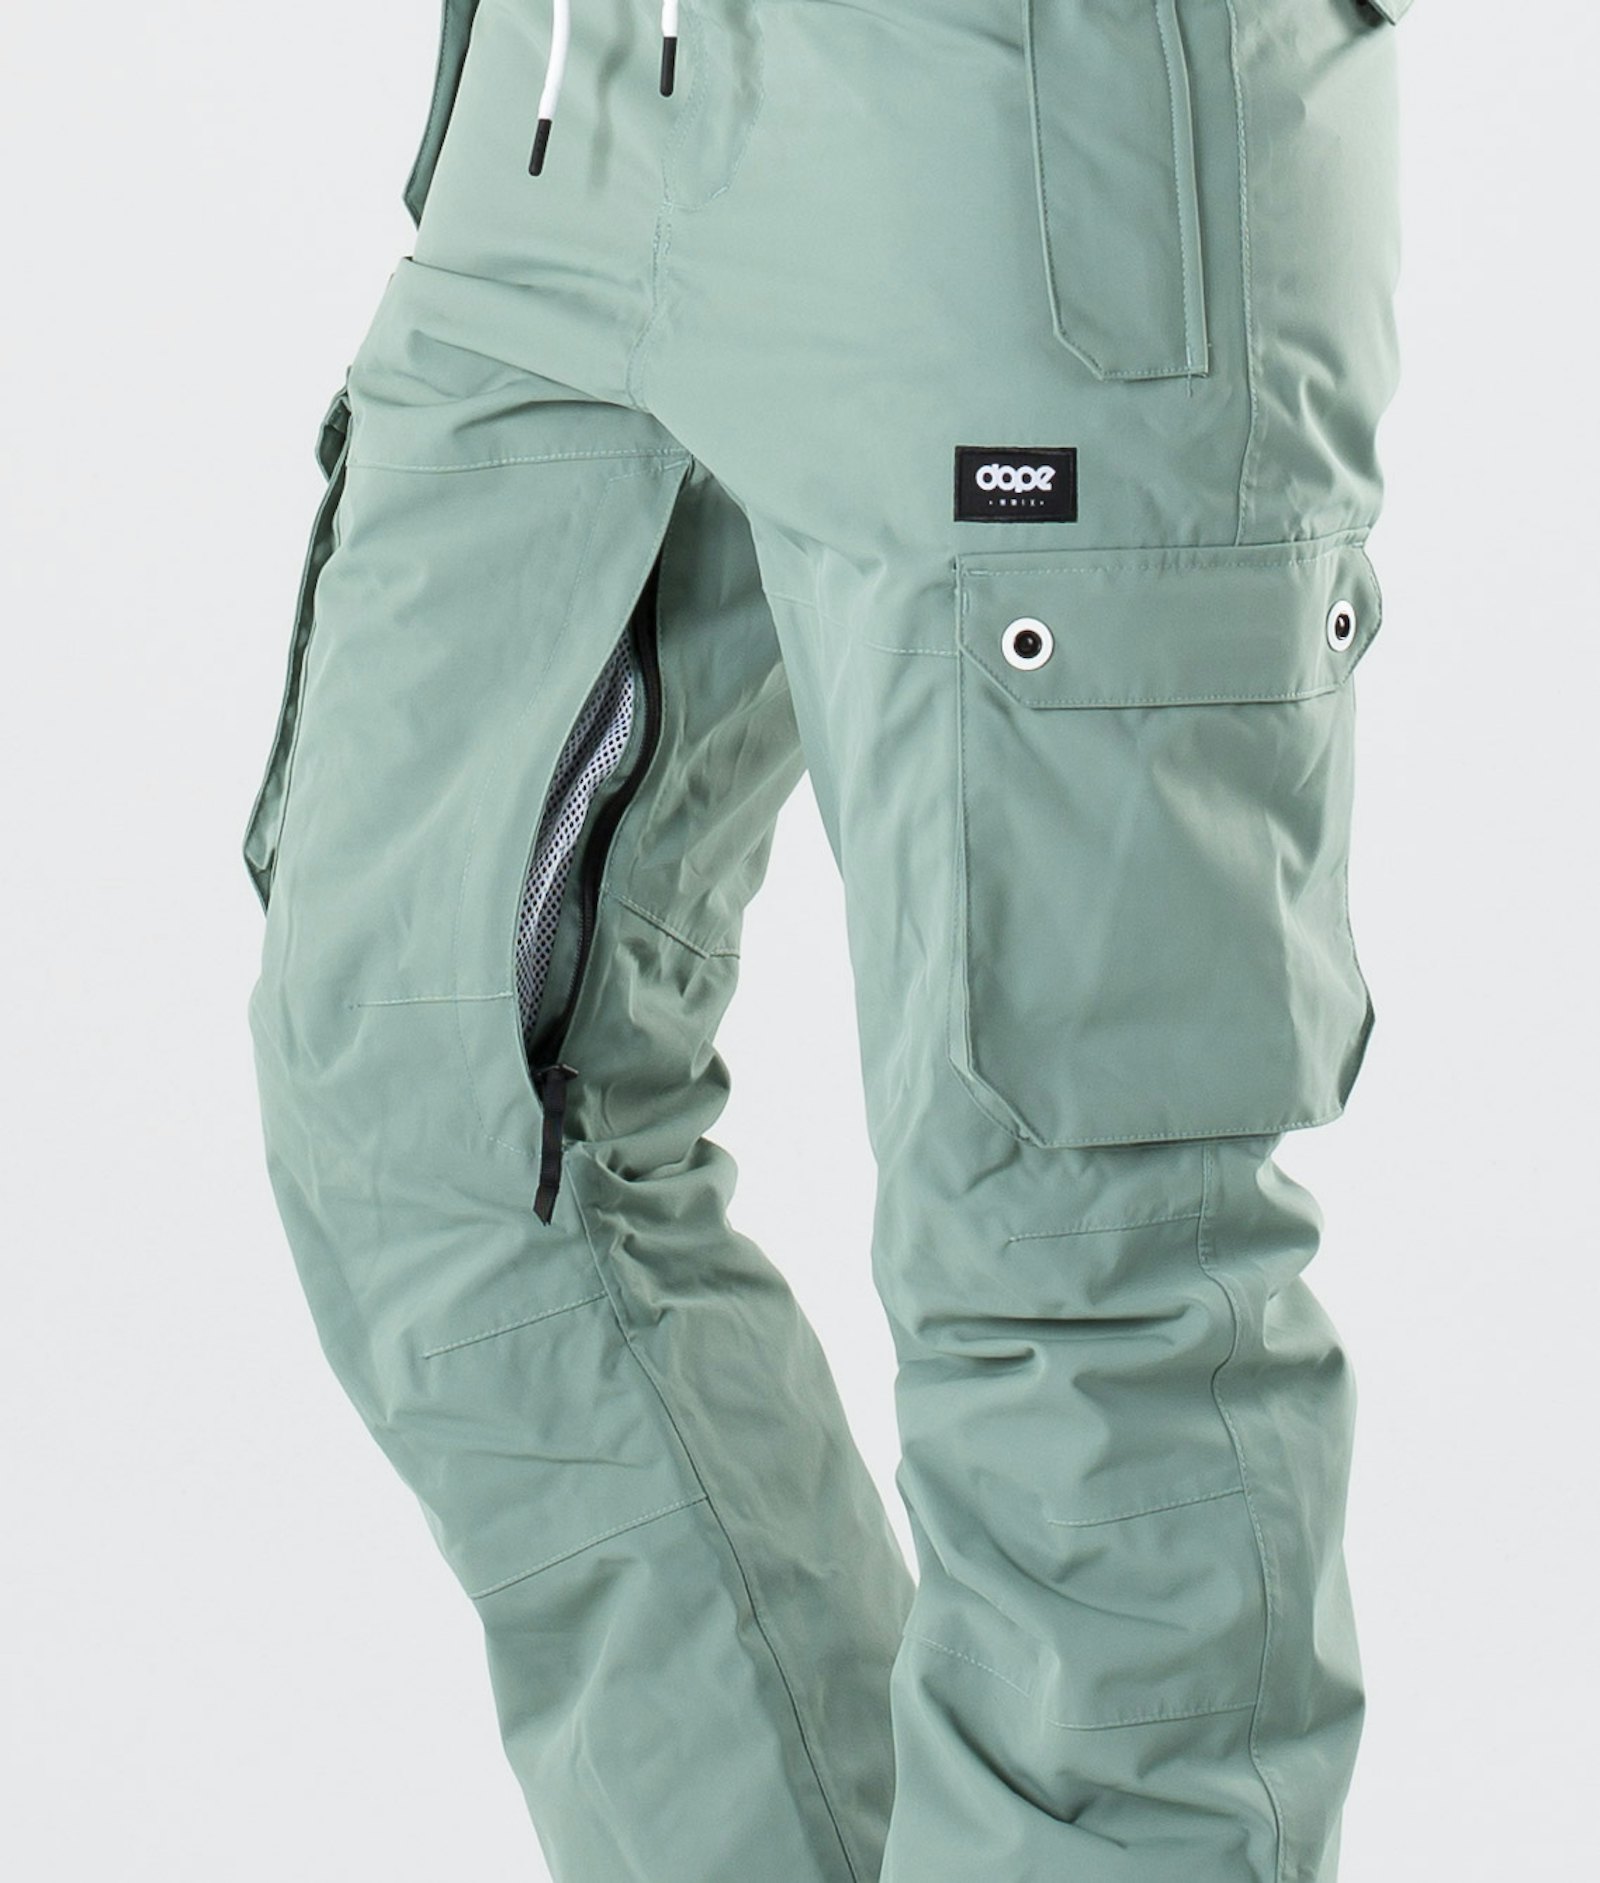 Dope Iconic W 2020 Pantalones Snowboard Mujer Faded Green